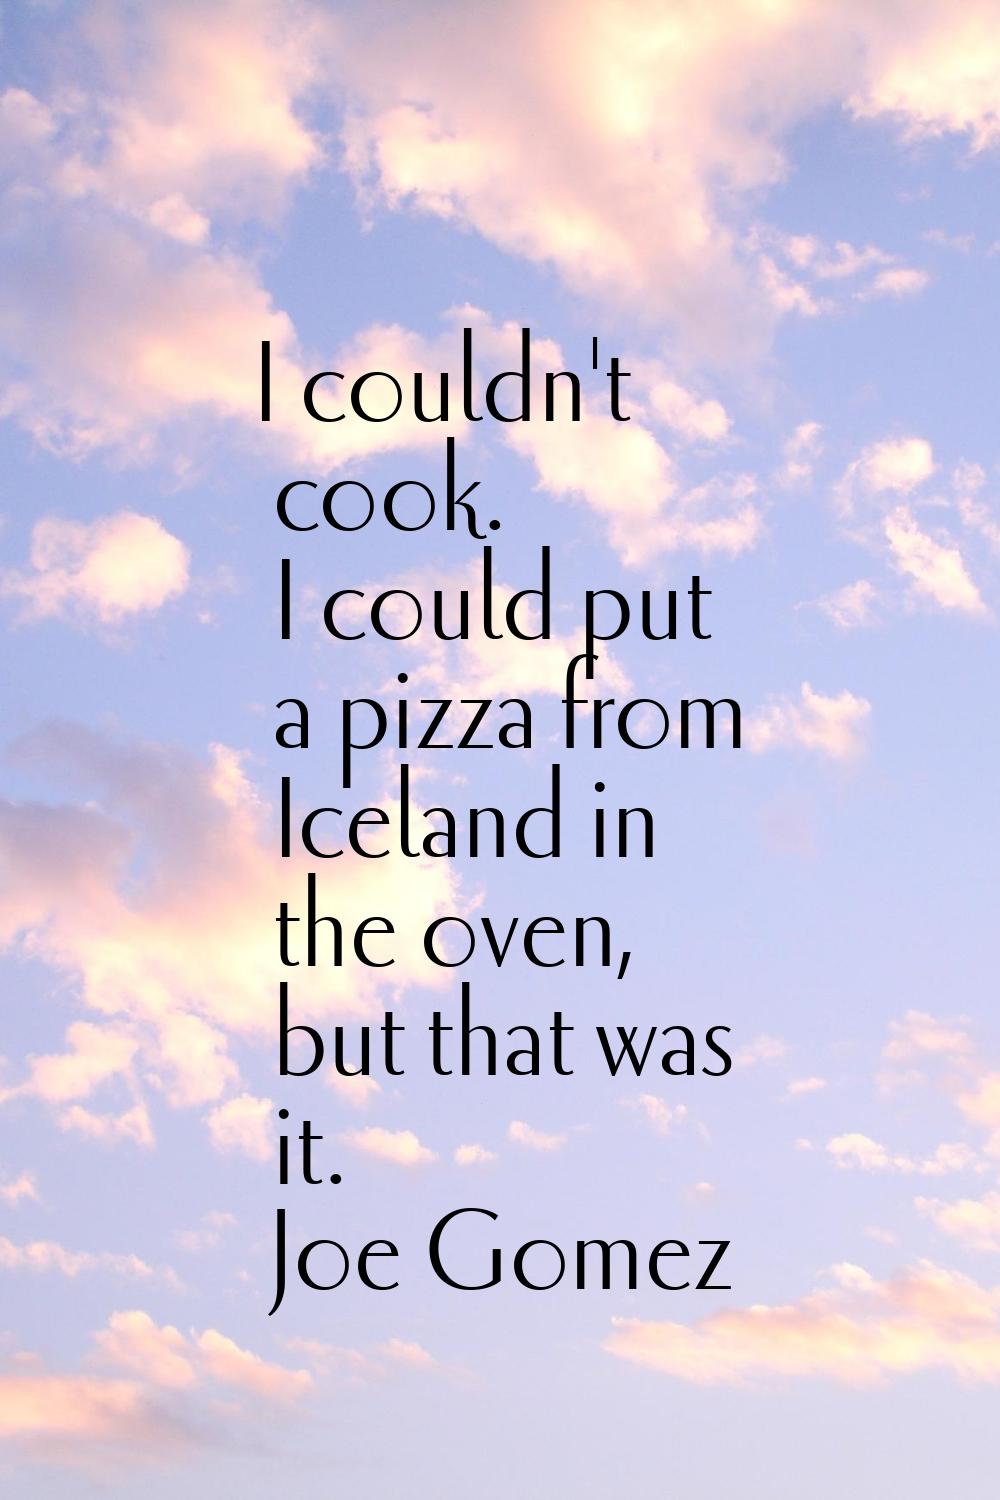 I couldn't cook. I could put a pizza from Iceland in the oven, but that was it.